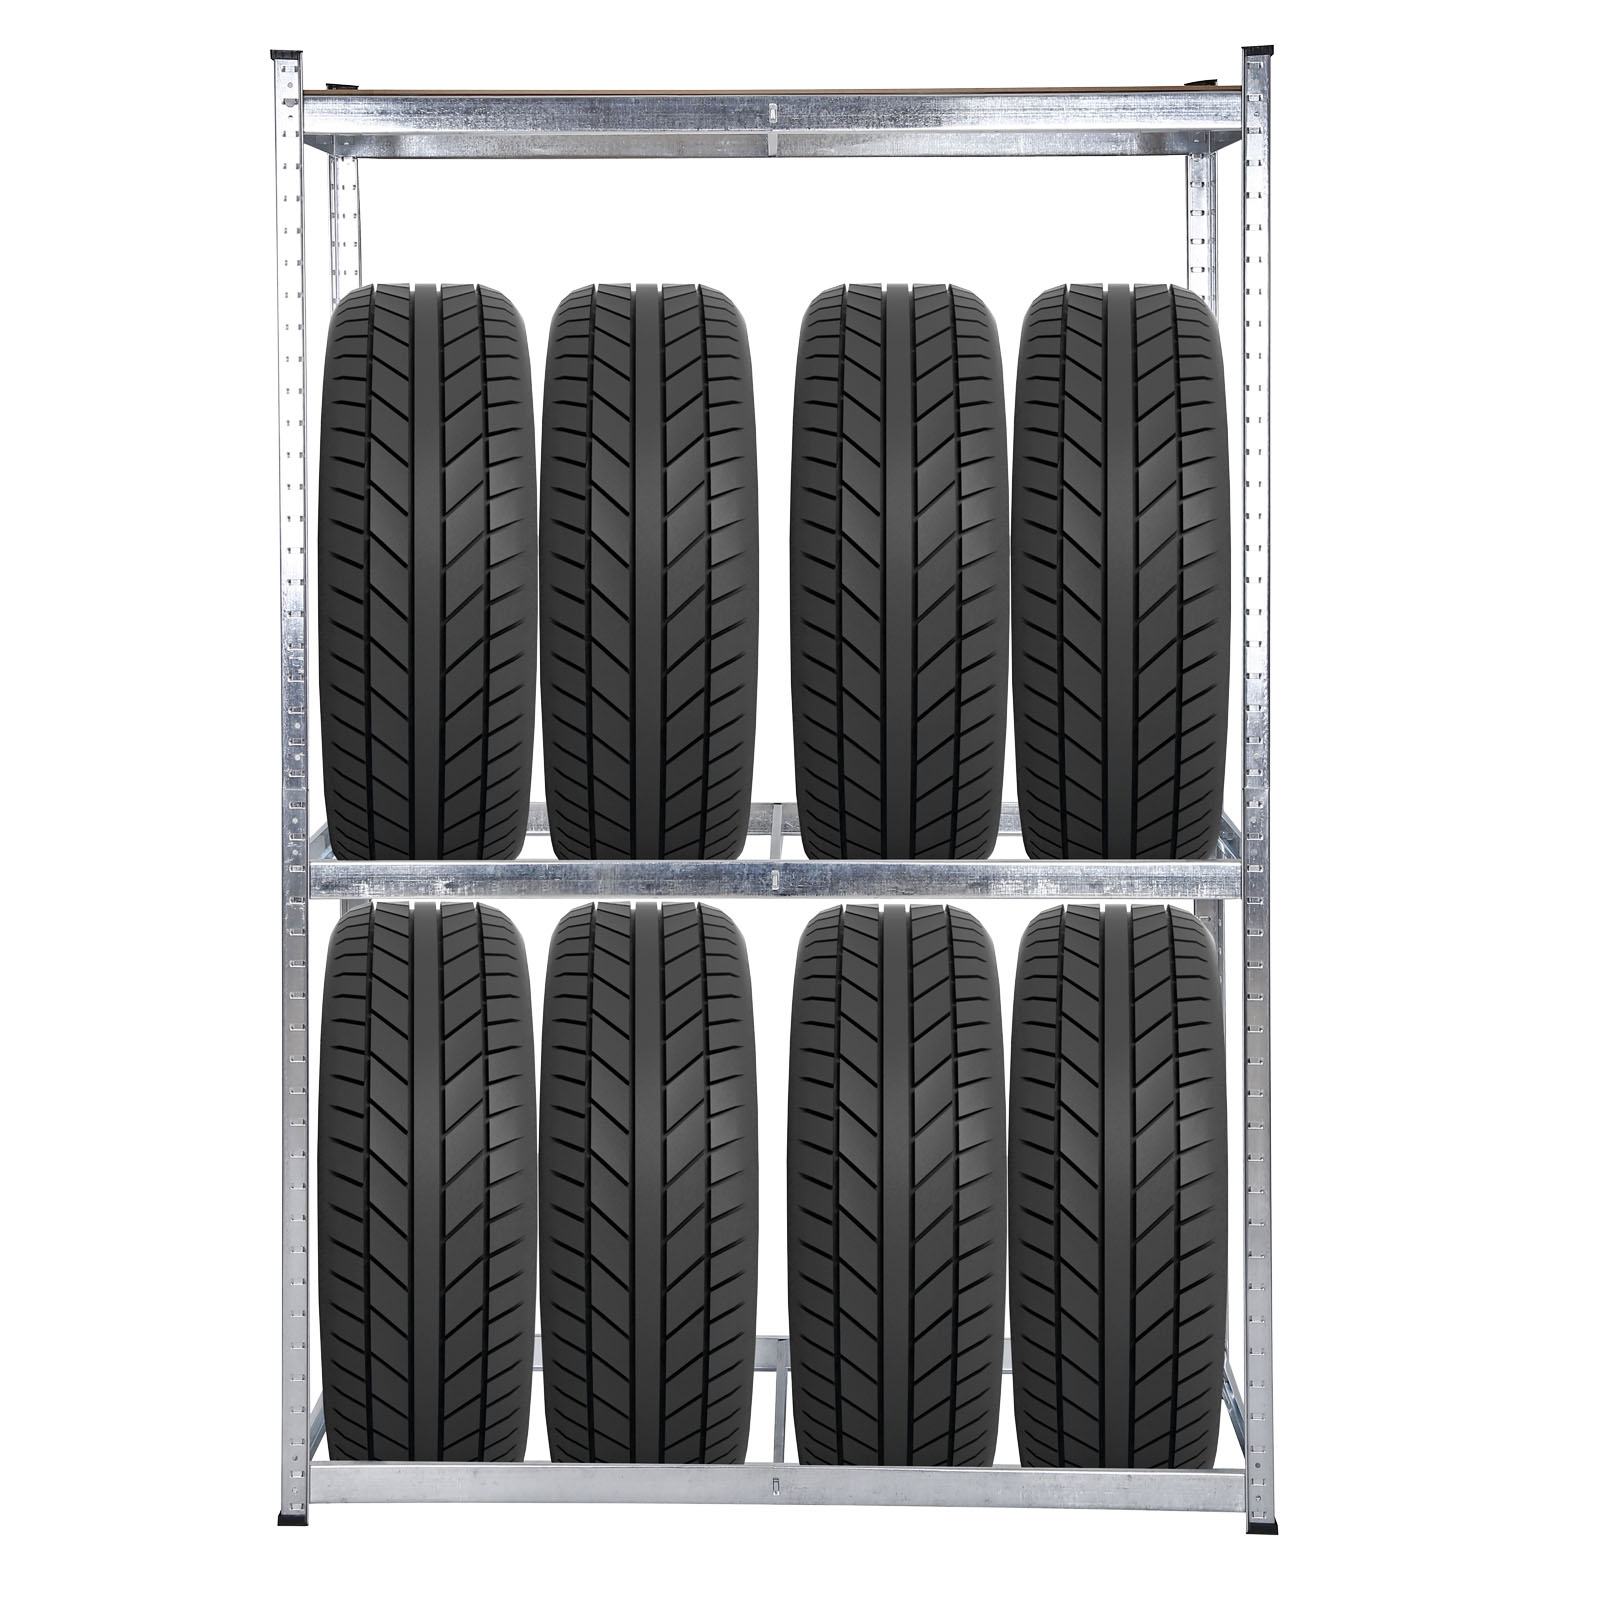 Wiltec Tires holder wall mounting for 8 tires accessories for tires 